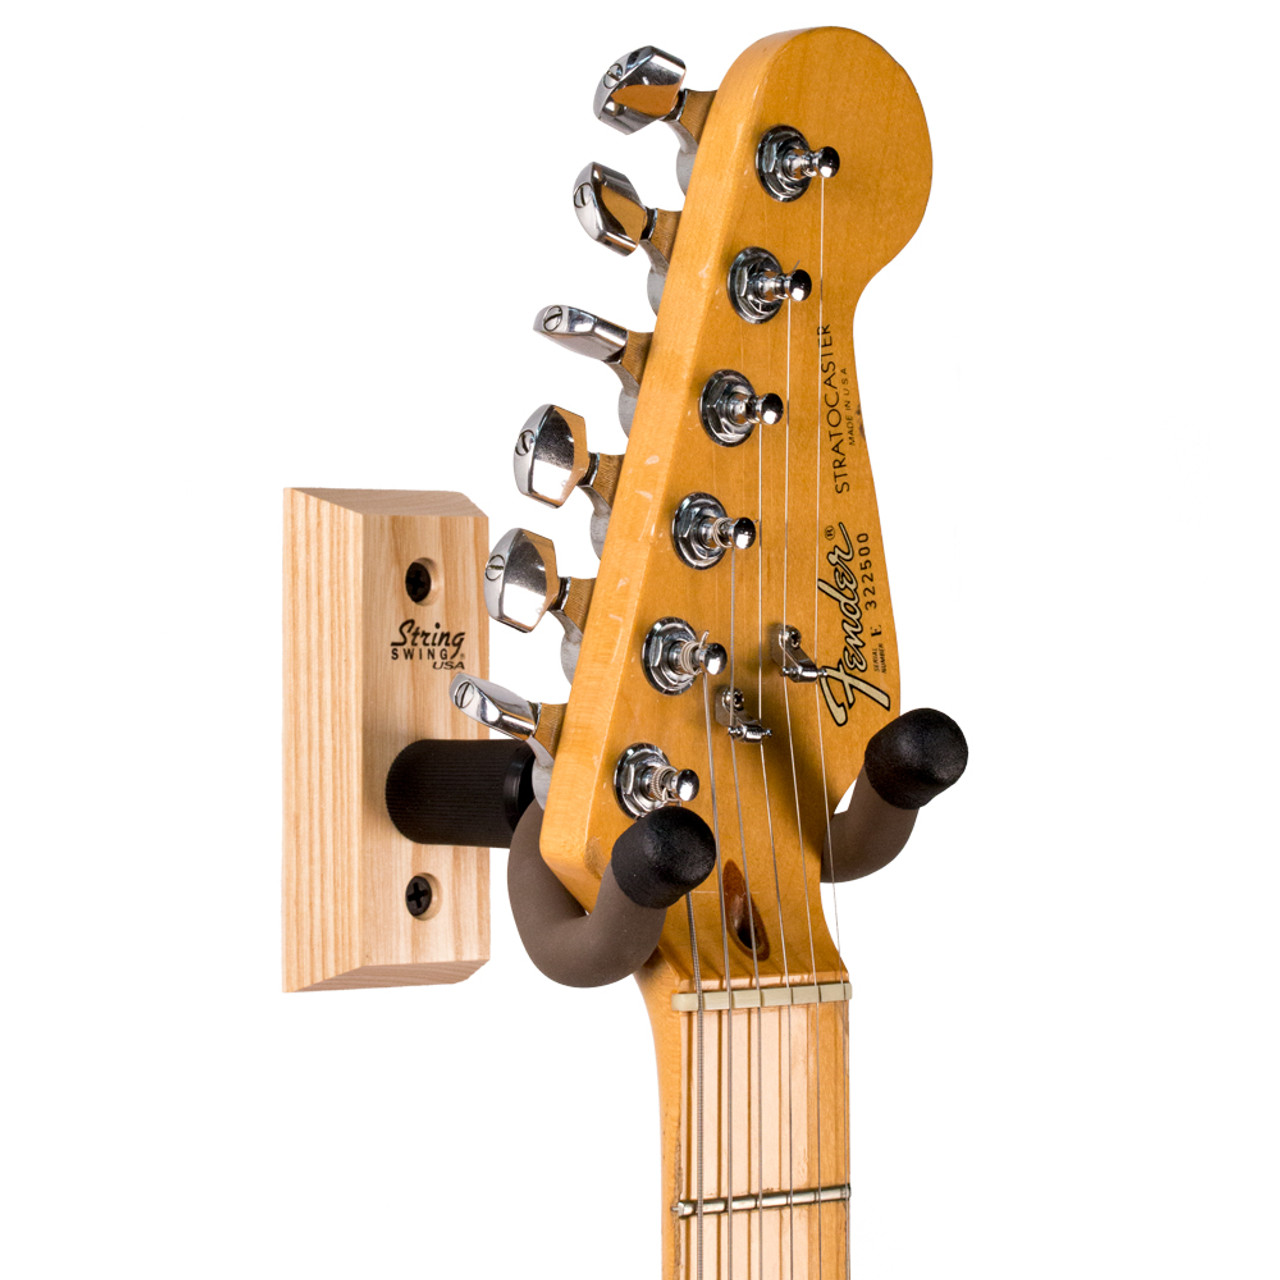 https://cdn11.bigcommerce.com/s-5r2w8tg1gb/images/stencil/1280x1280/products/322/435/CC01K-angle-Stratocaster--Ash__49761.1633552012.jpg?c=1